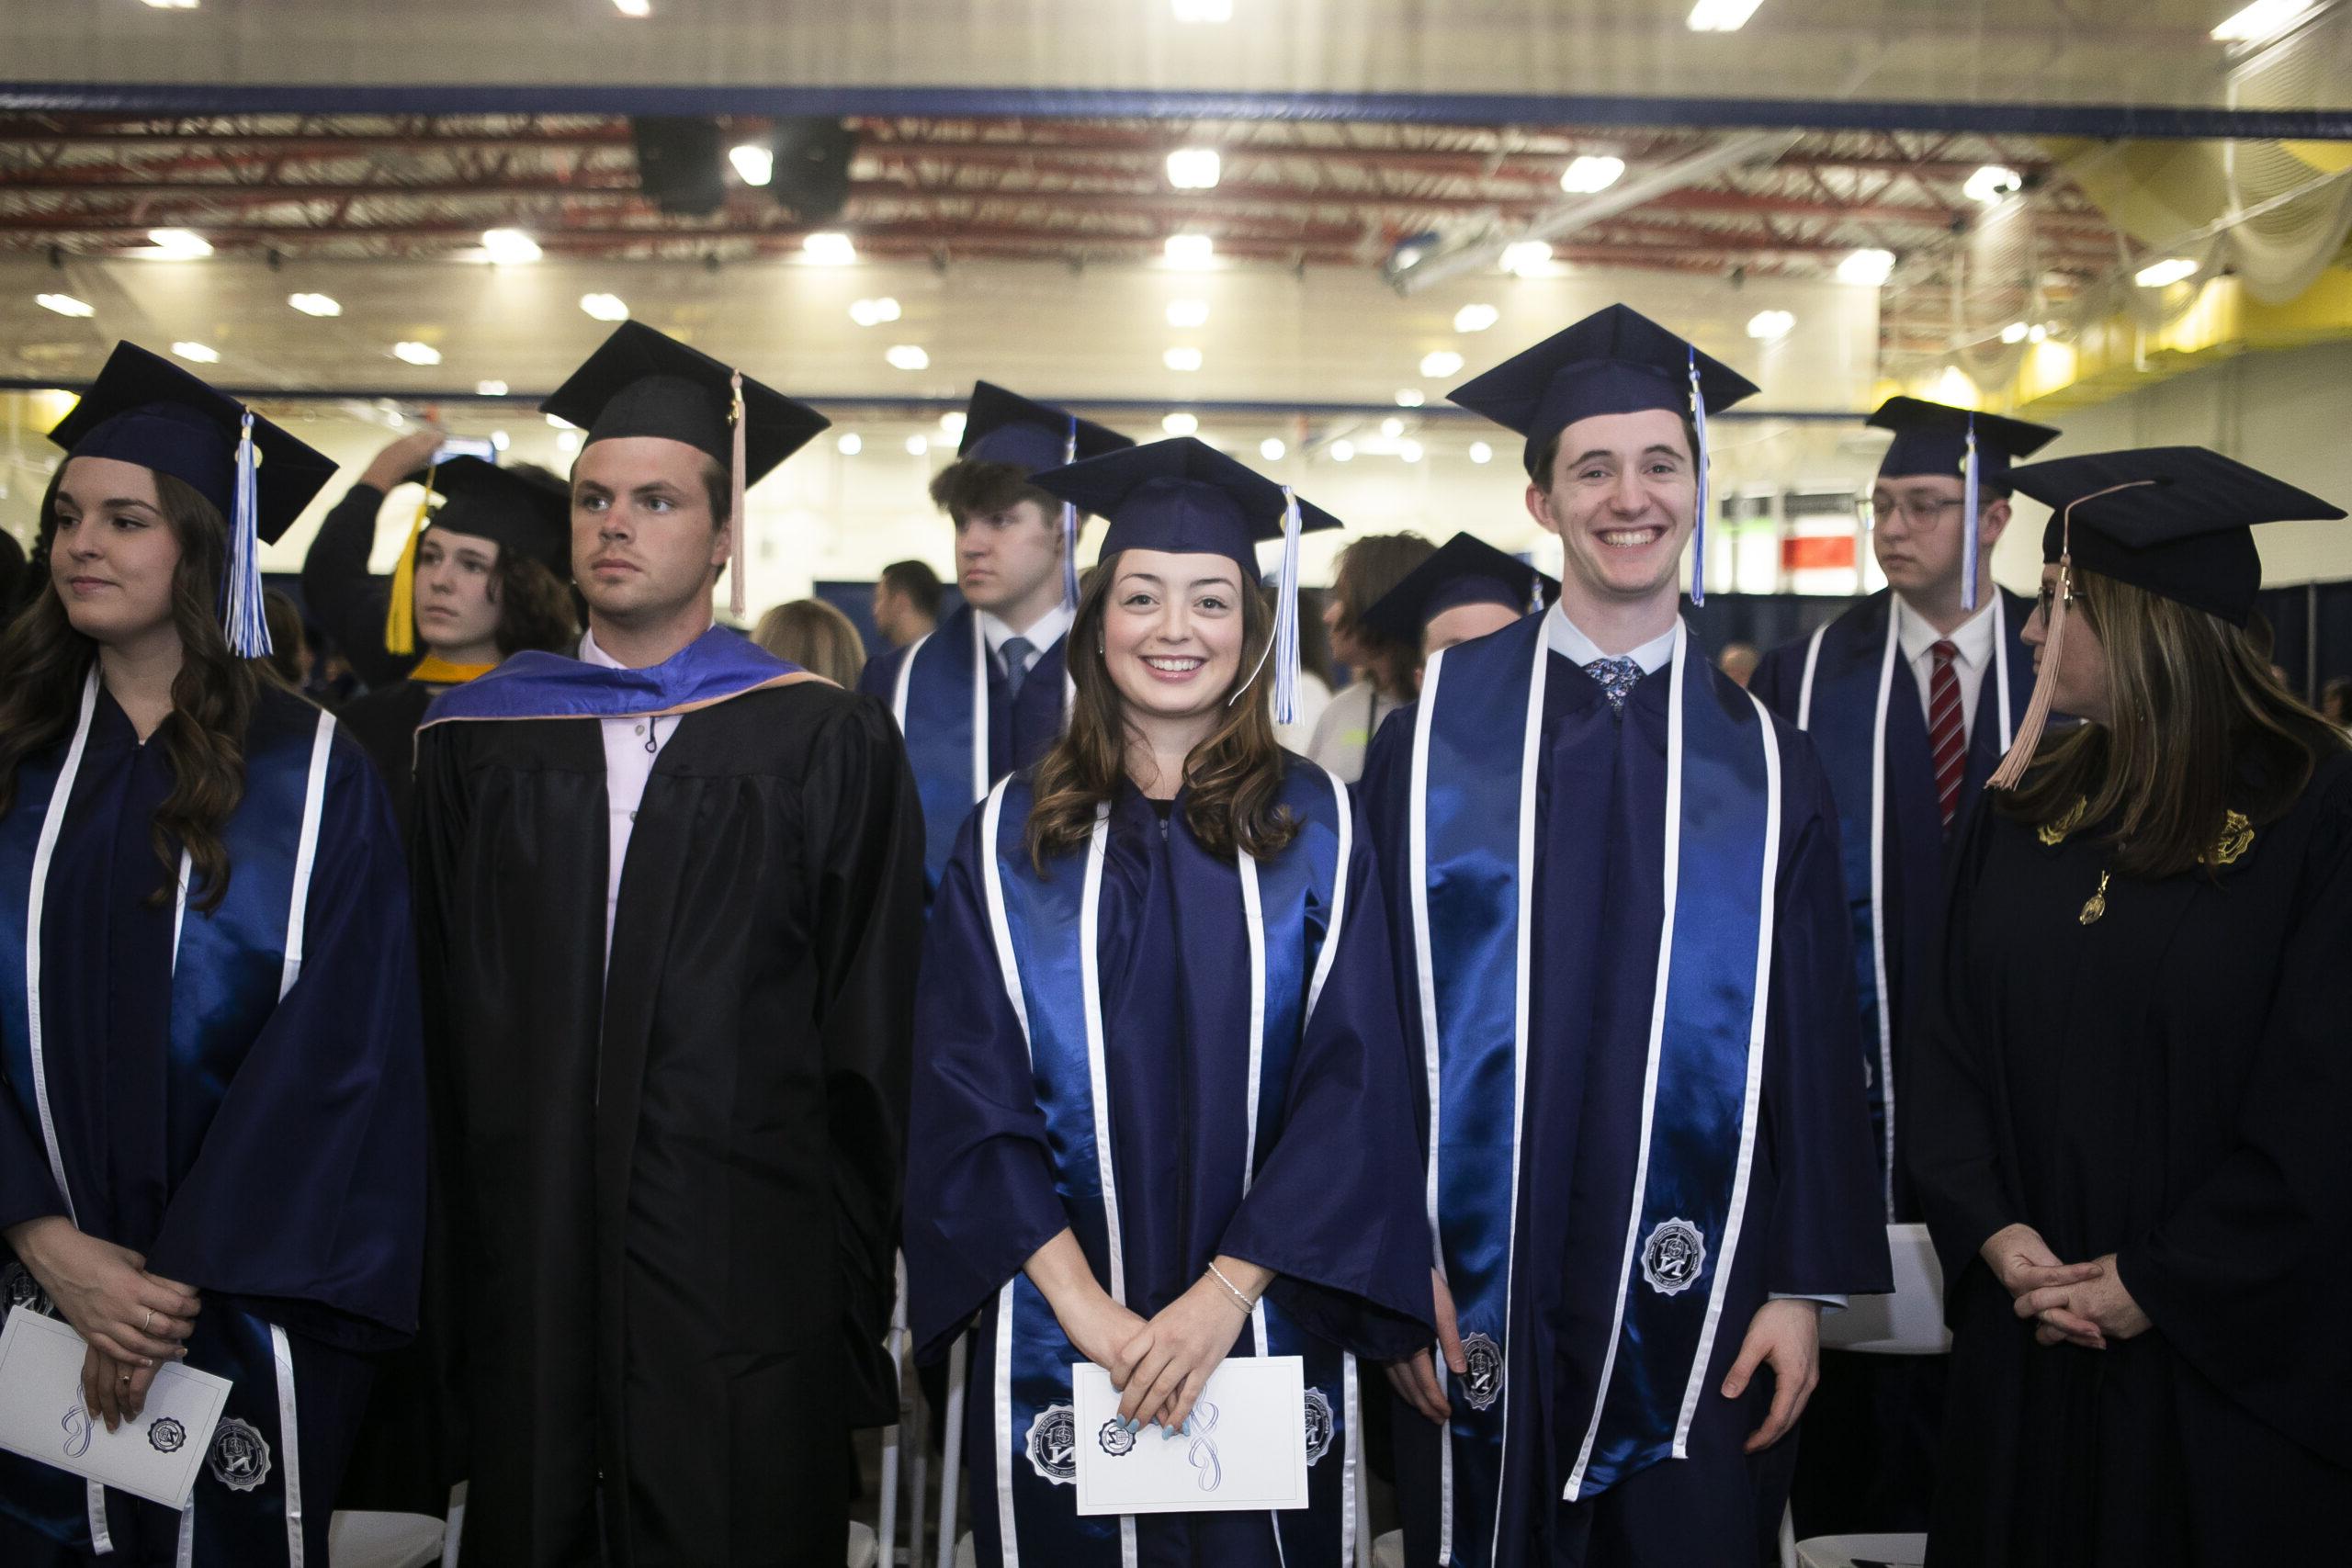 Honors students pictured walking at Convocation